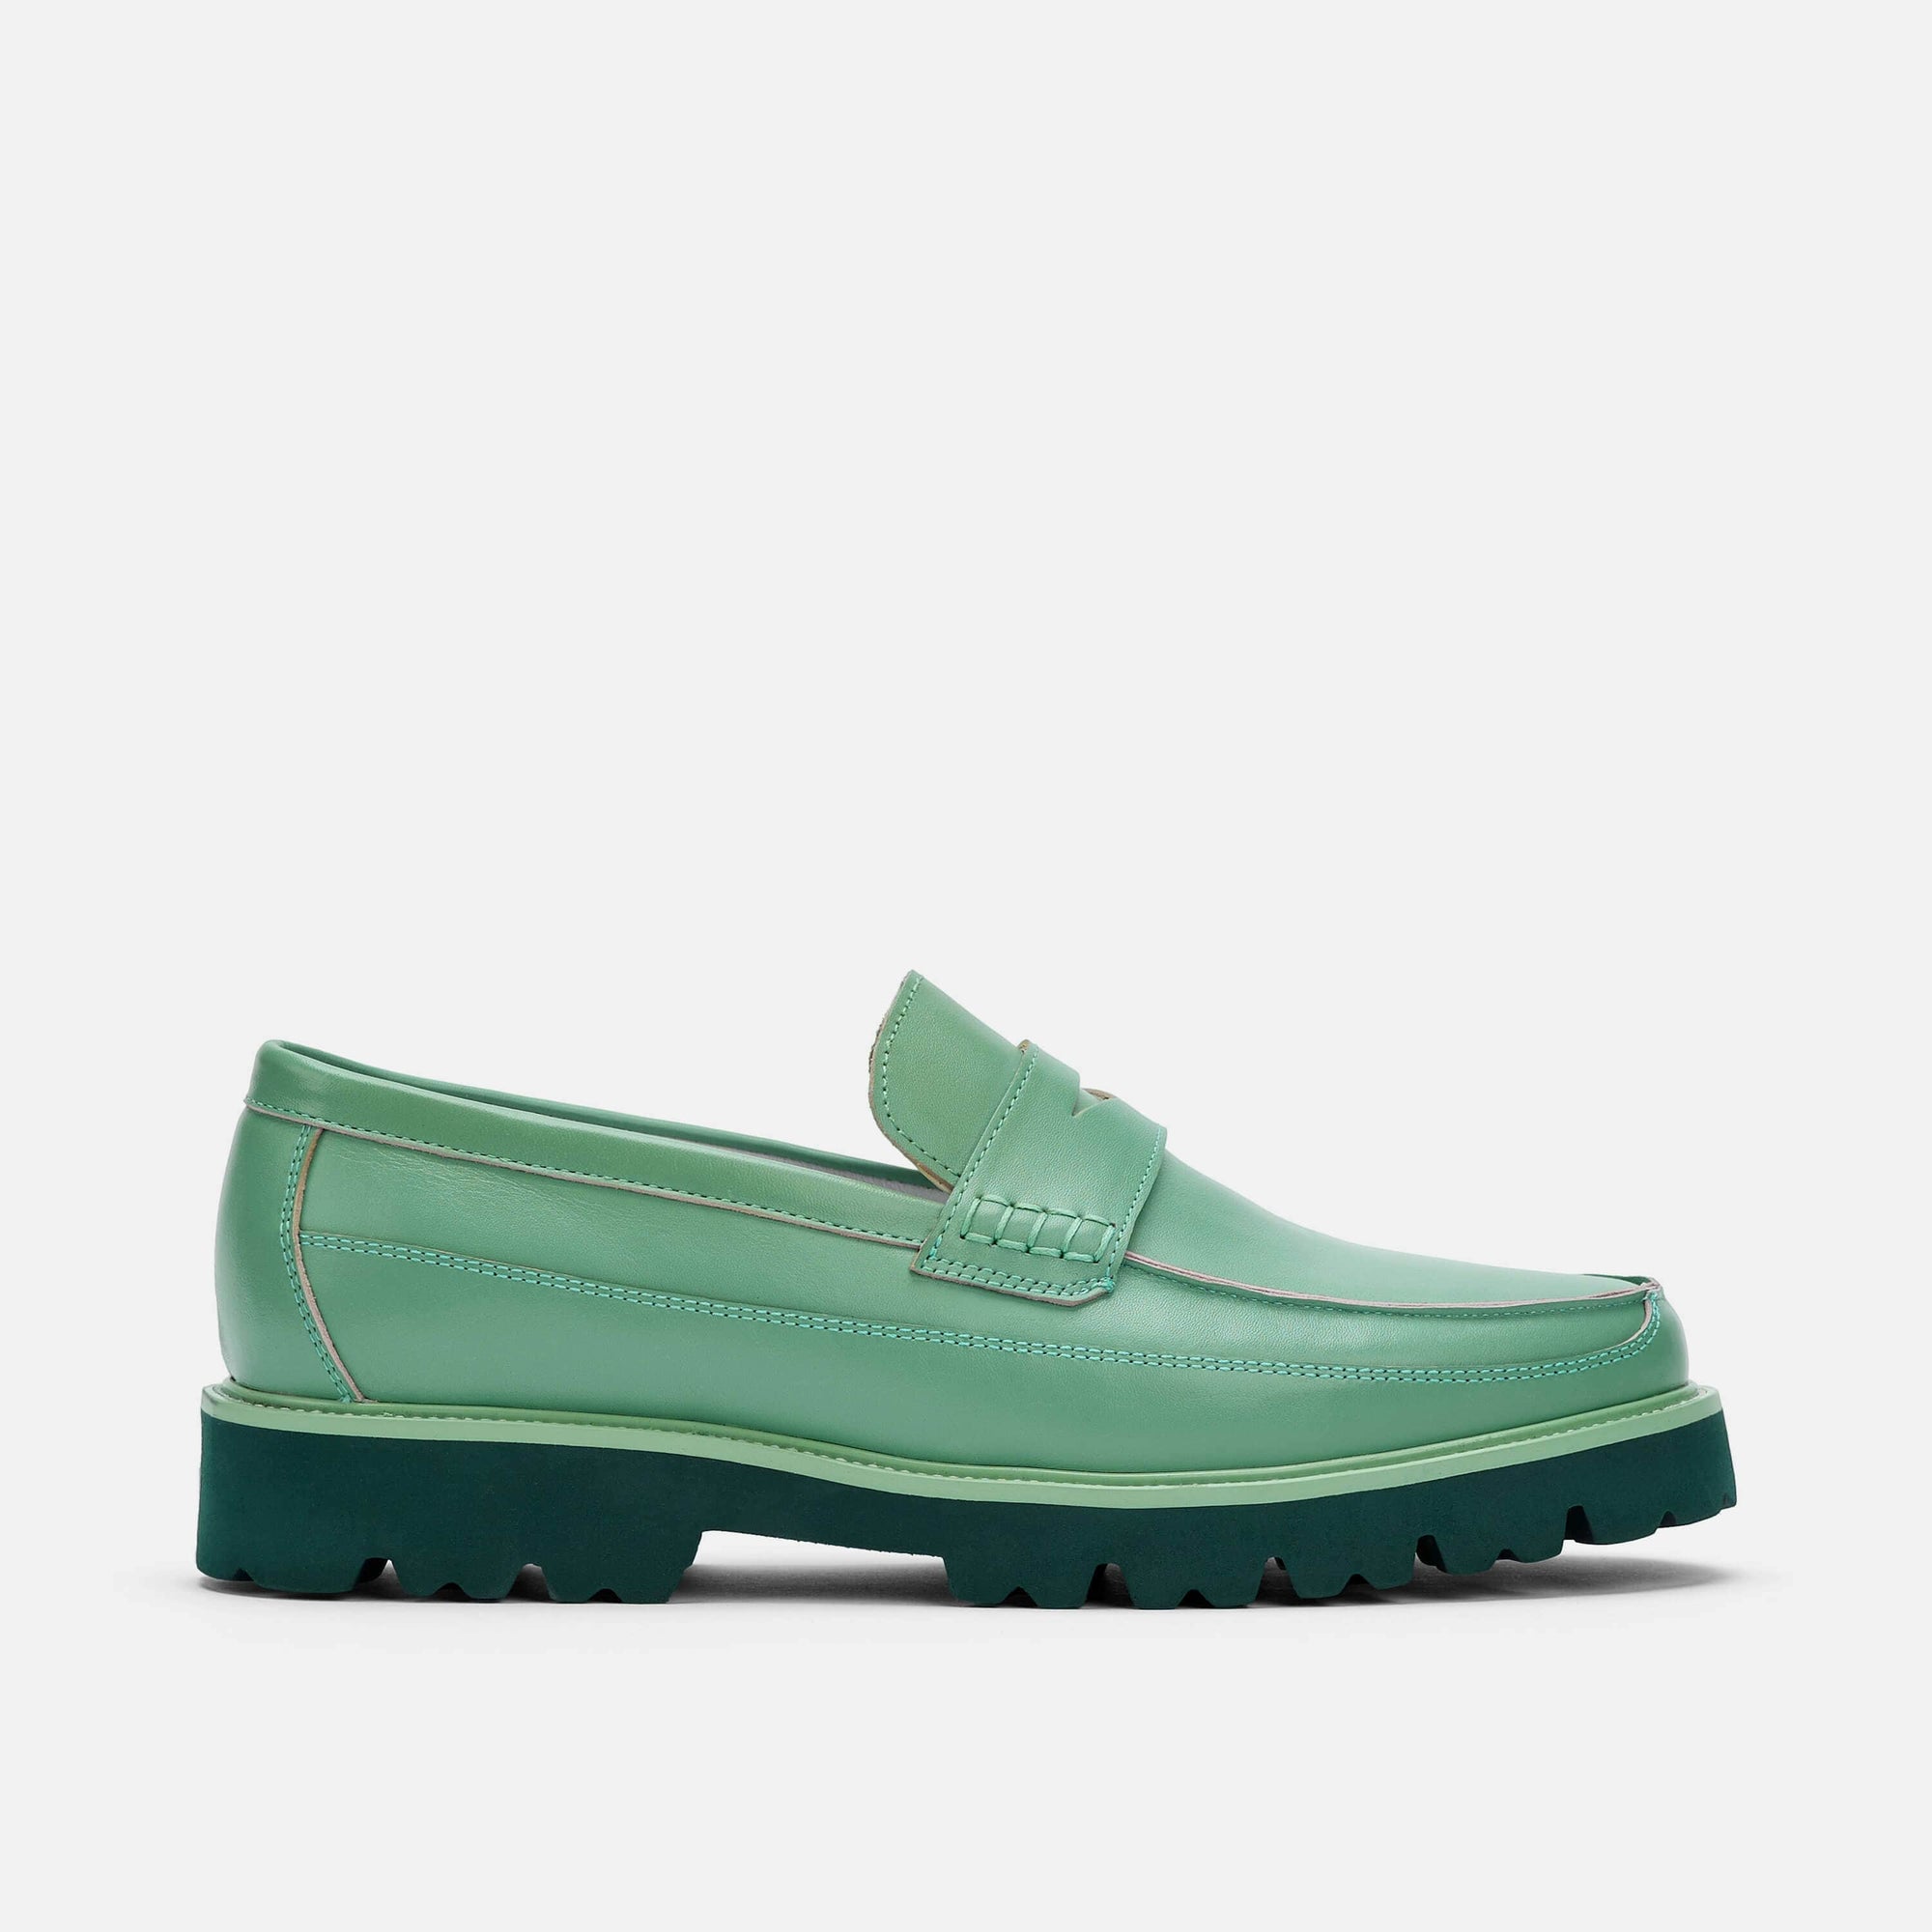 Adler Green Ombre Penny Loafers